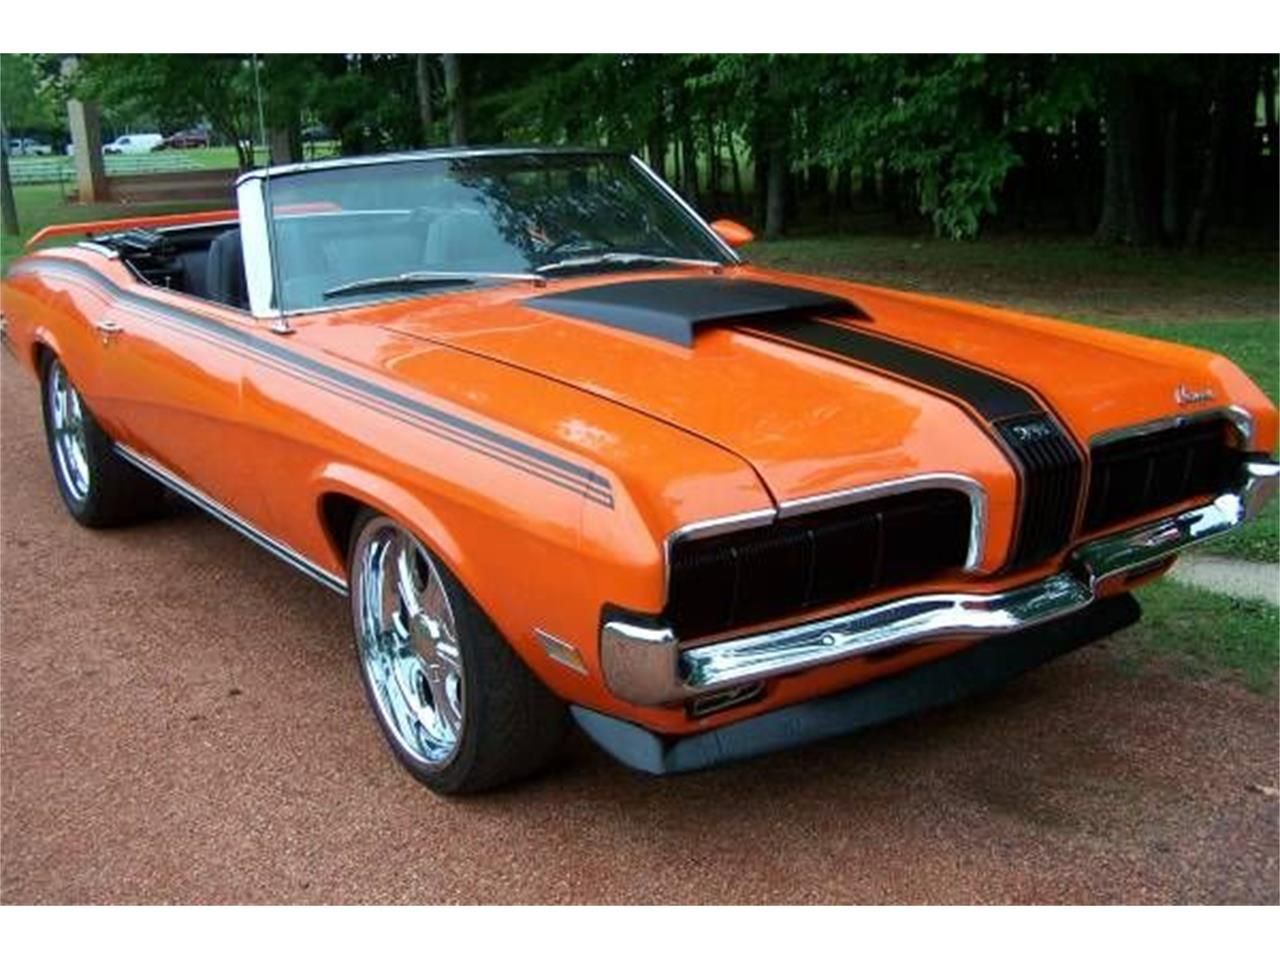 1970 Mercury Cougar XR7 parked outside